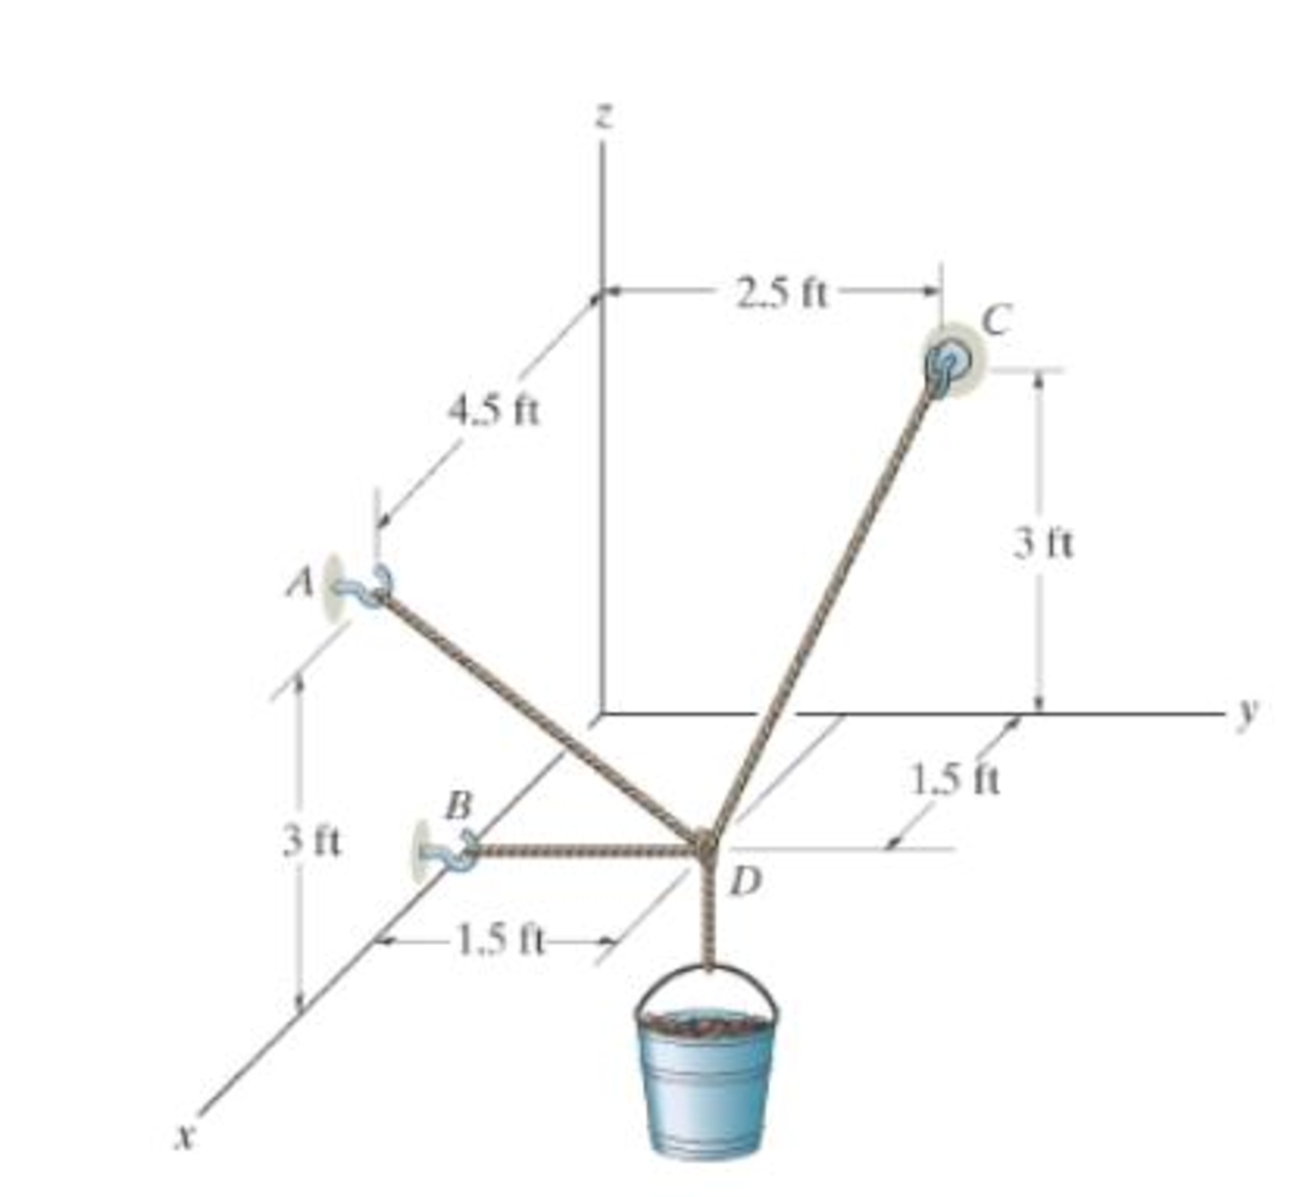 Chapter 3.4, Problem 45P, If the bucket and its contents have a total weight of 20 lb, determine the force in the supporting 